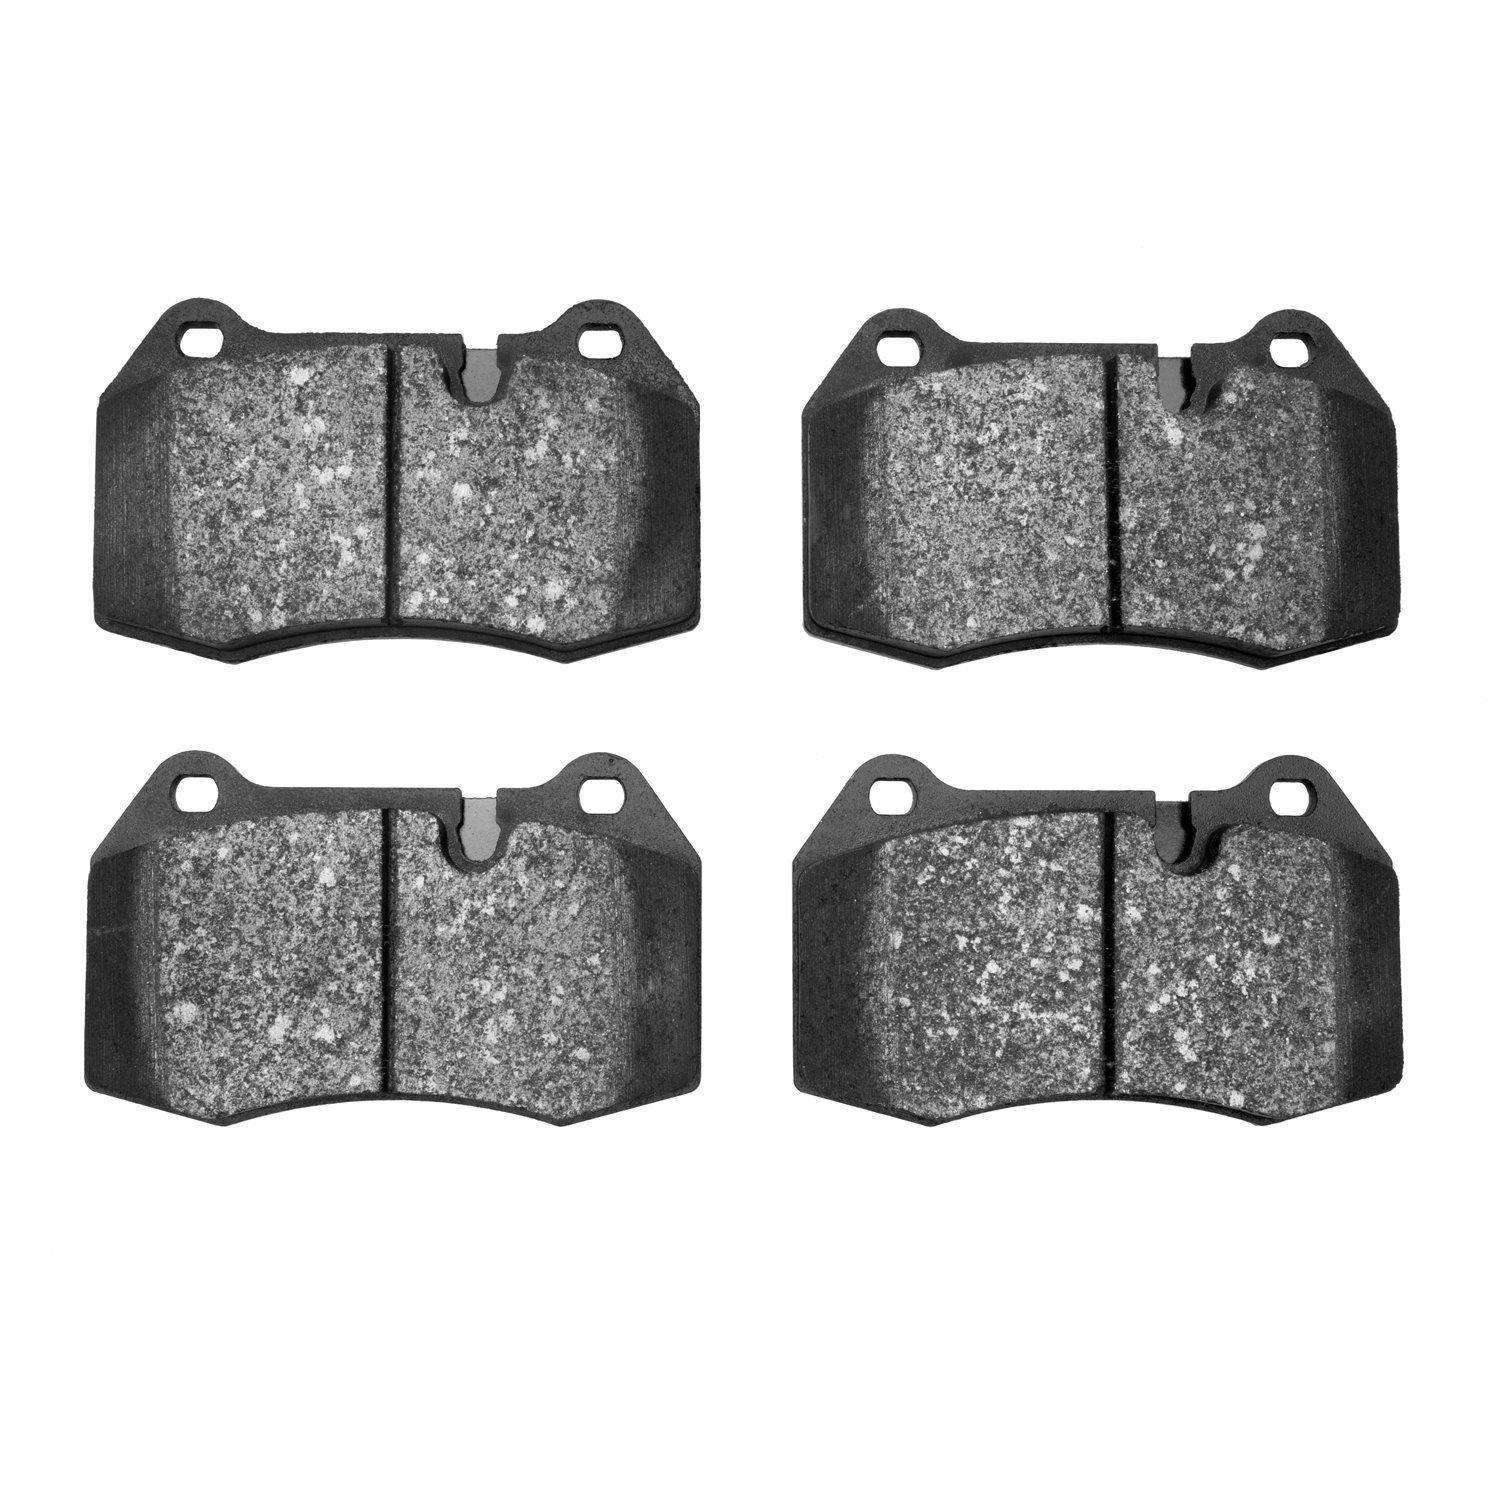 1551-1133-00 5000 Advanced Low-Metallic Brake Pads, 2003-2019 Multiple Makes/Models, Position: Front